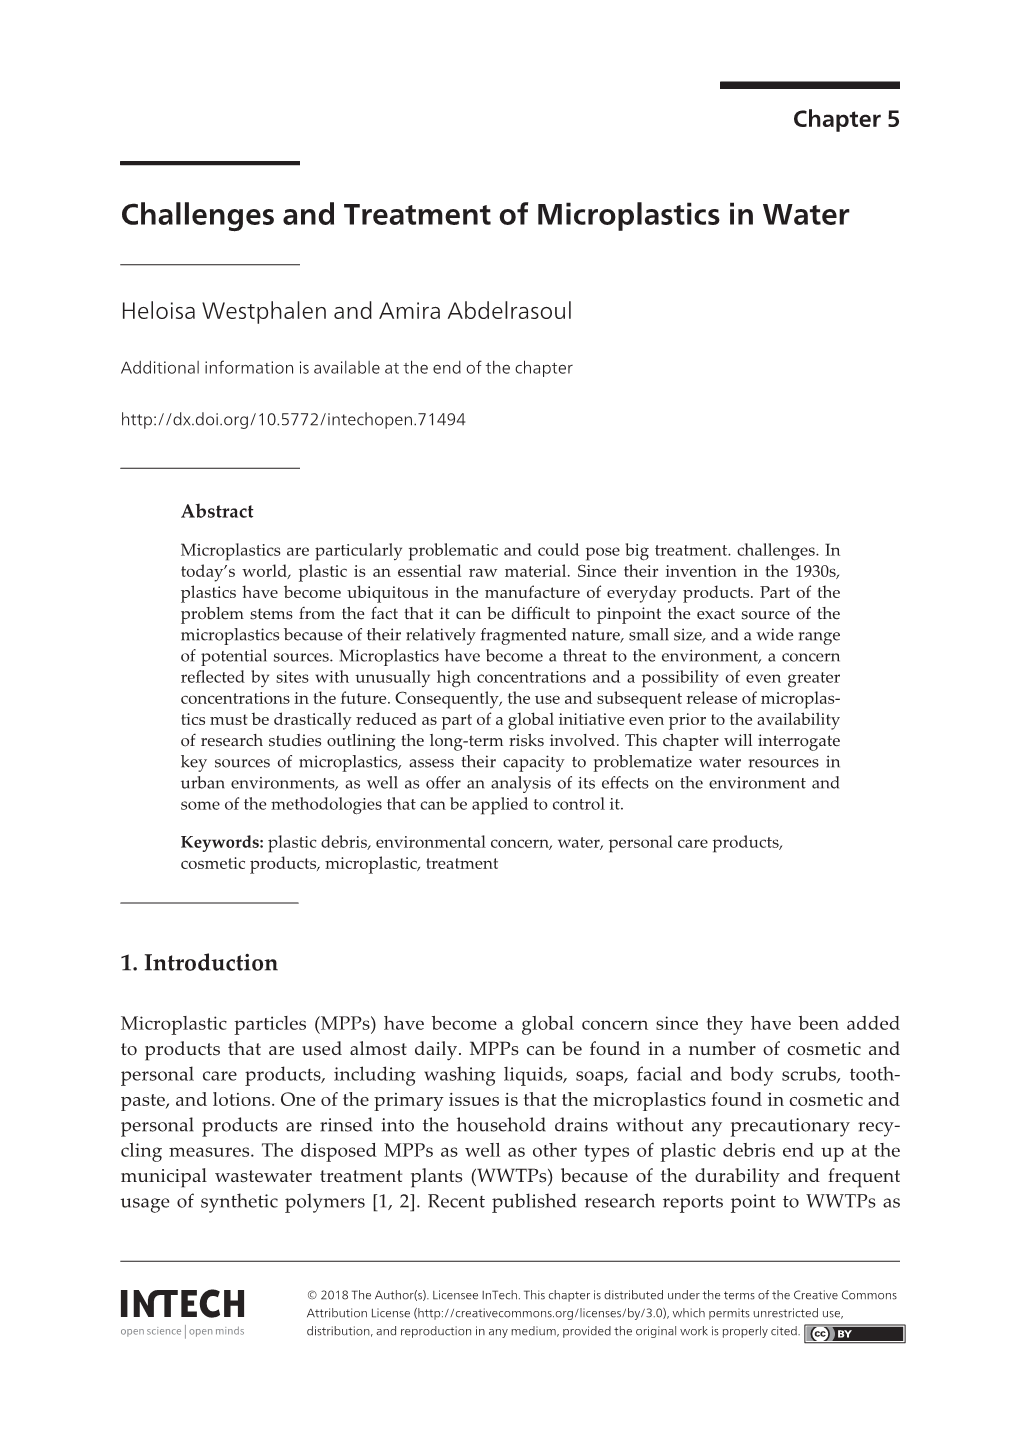 Challenges and Treatment of Microplastics in Water Challenges and Treatment of Microplastics in Water